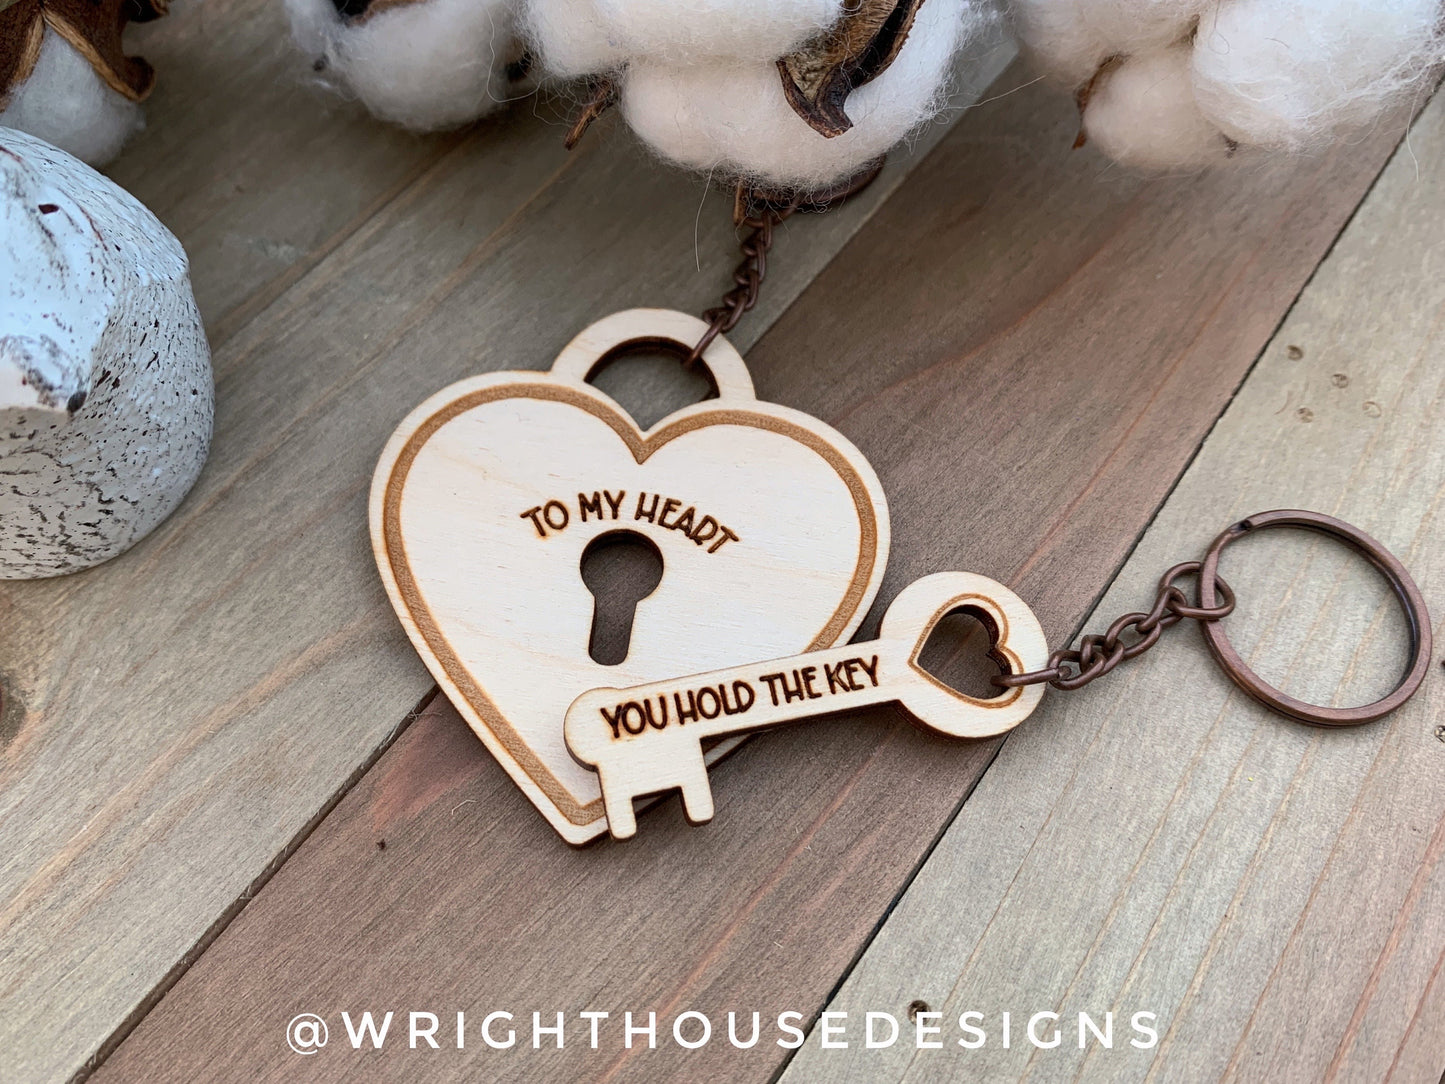 Couples Heart and Arrow Keychain Set For Valentine's Day - His and Her Personalized Gifts - Digital SVG Cut Files For Glowforge Lasers